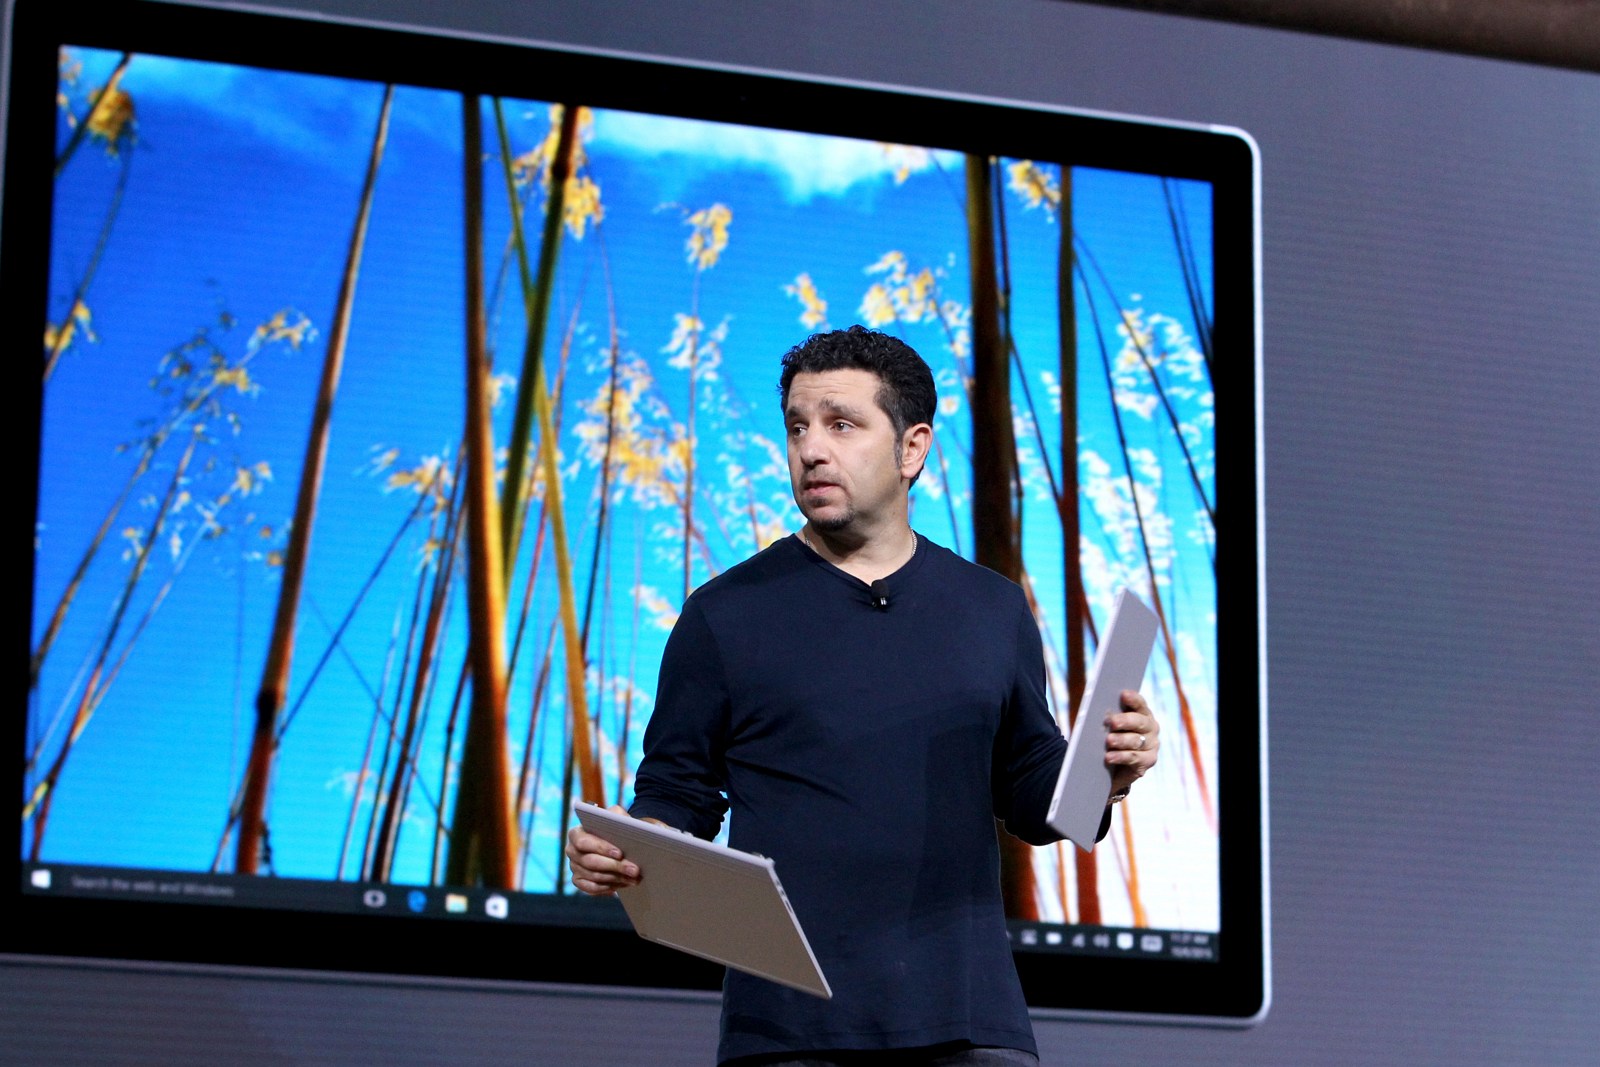 Panos Panay Surface and Windows 10 event (source: Microsoft)